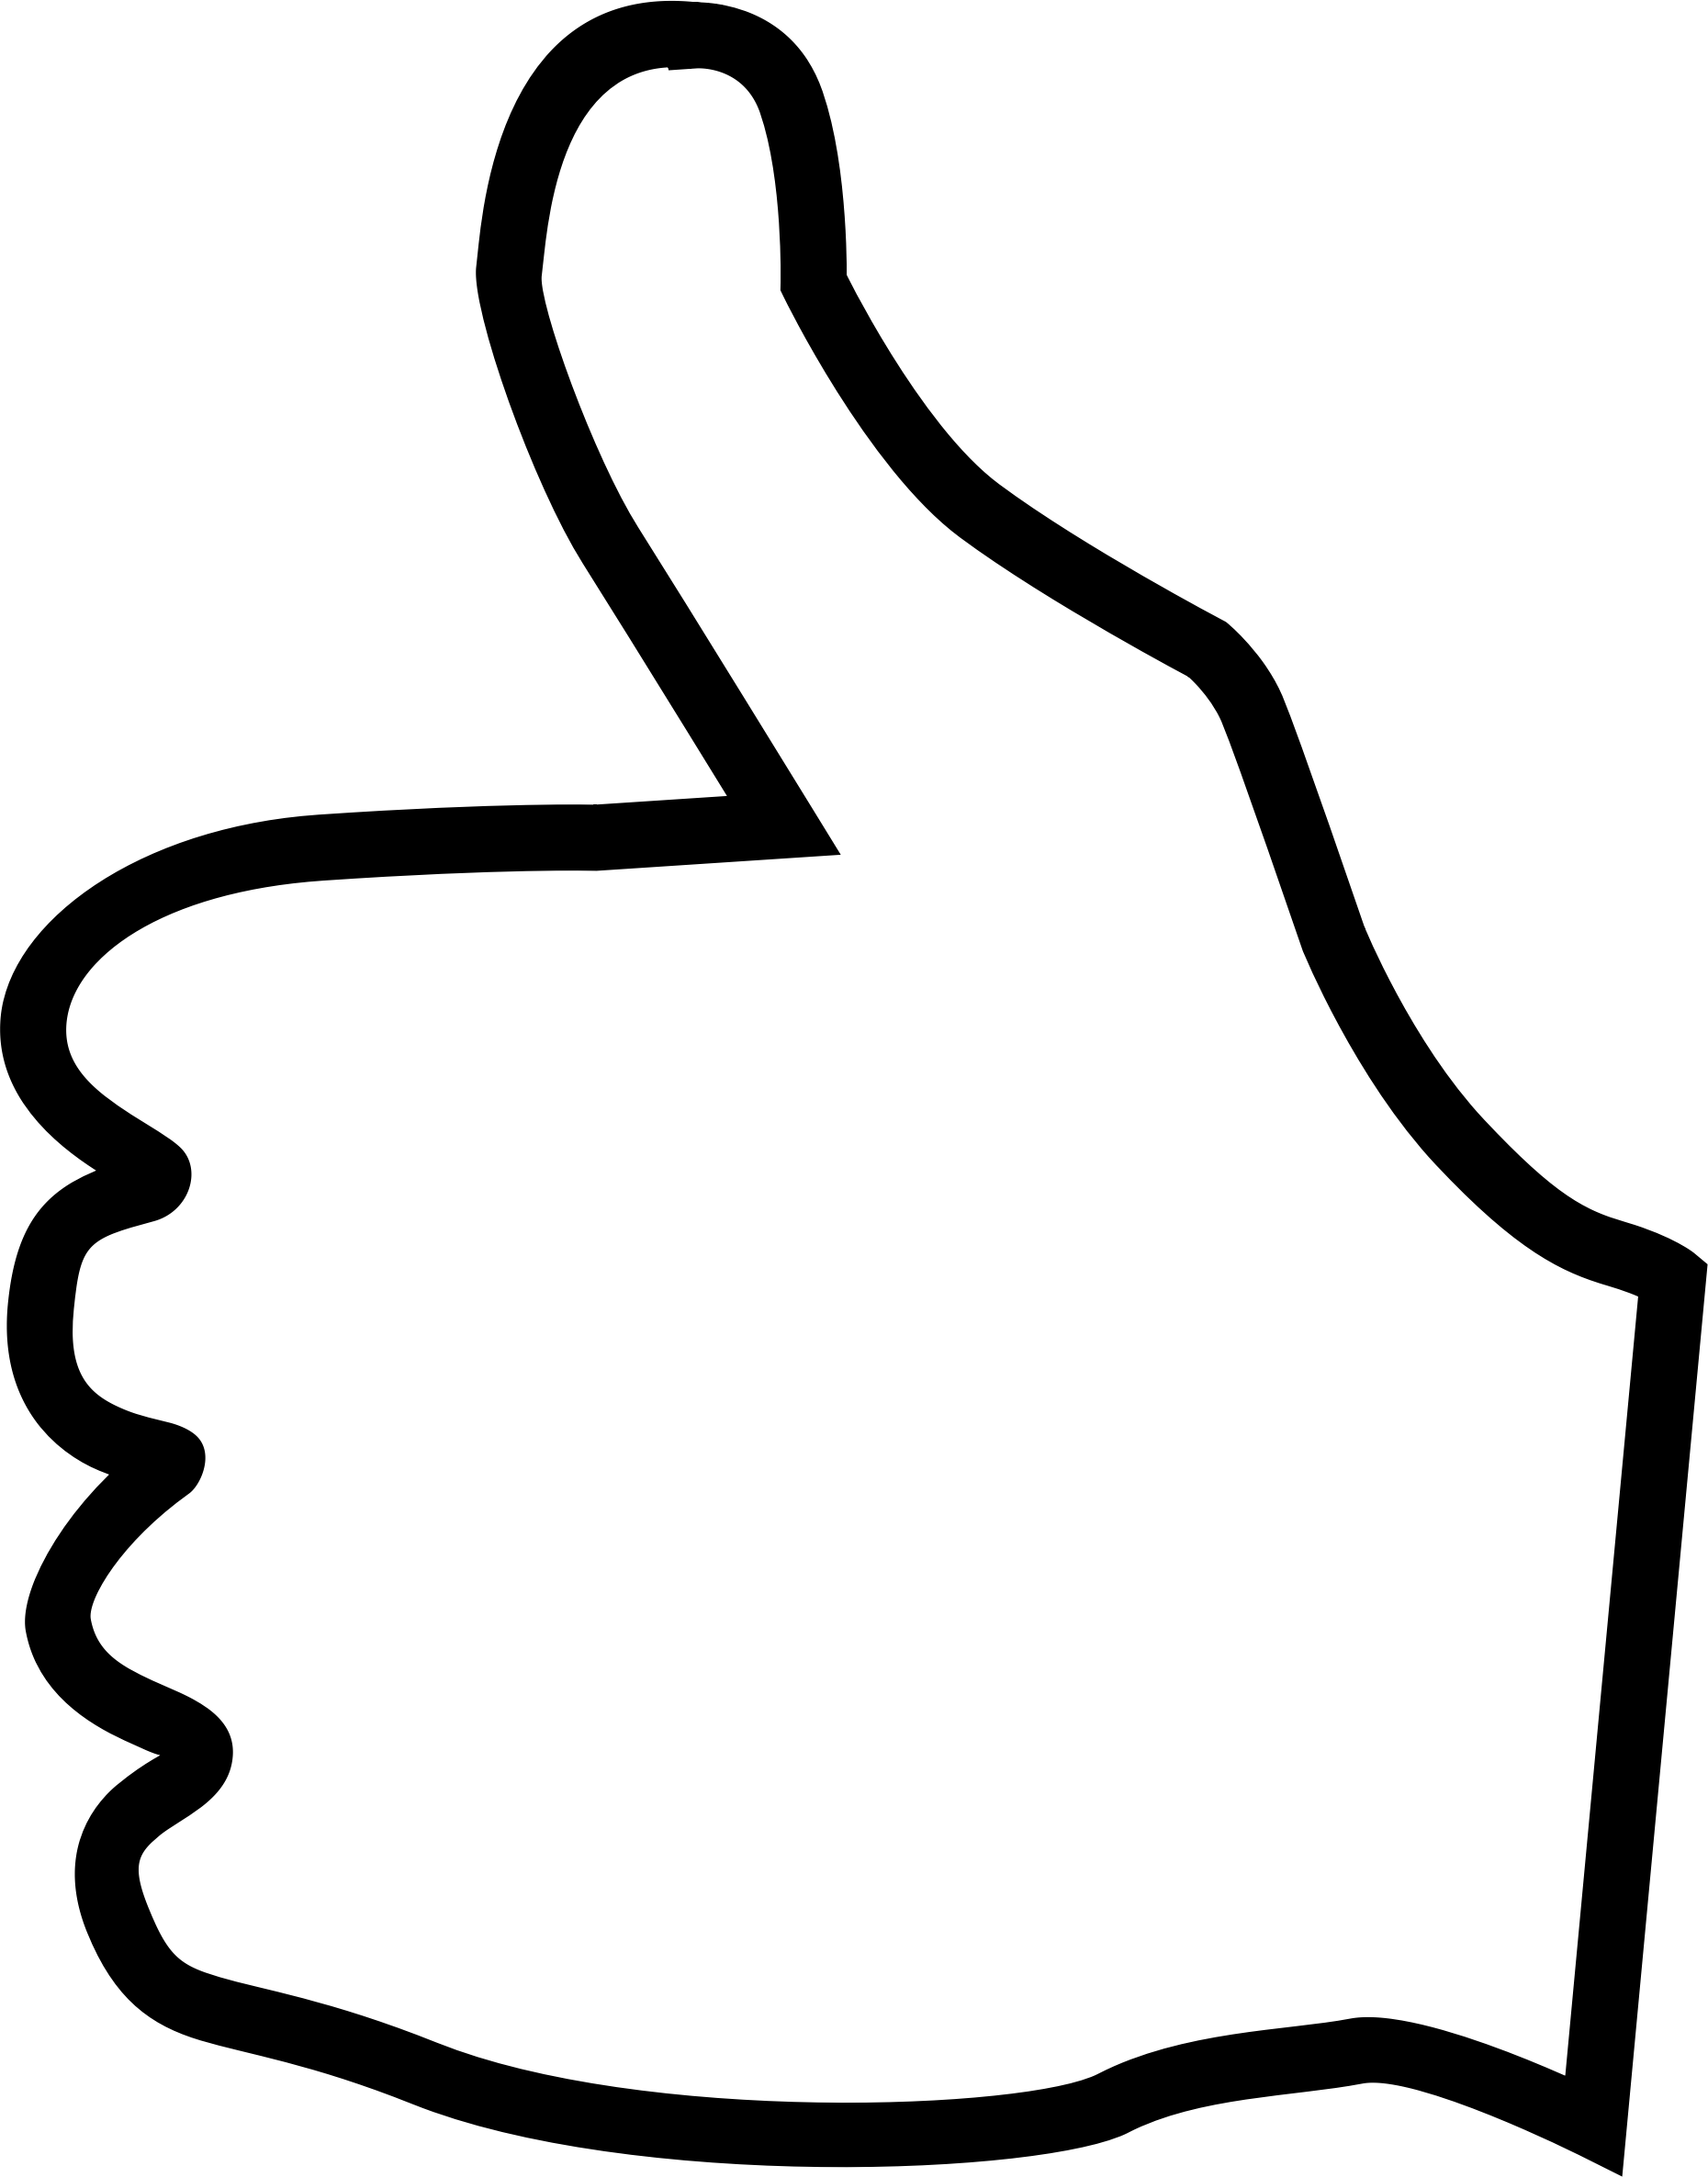 Smiley face clip art thumbs up free clipart images 3